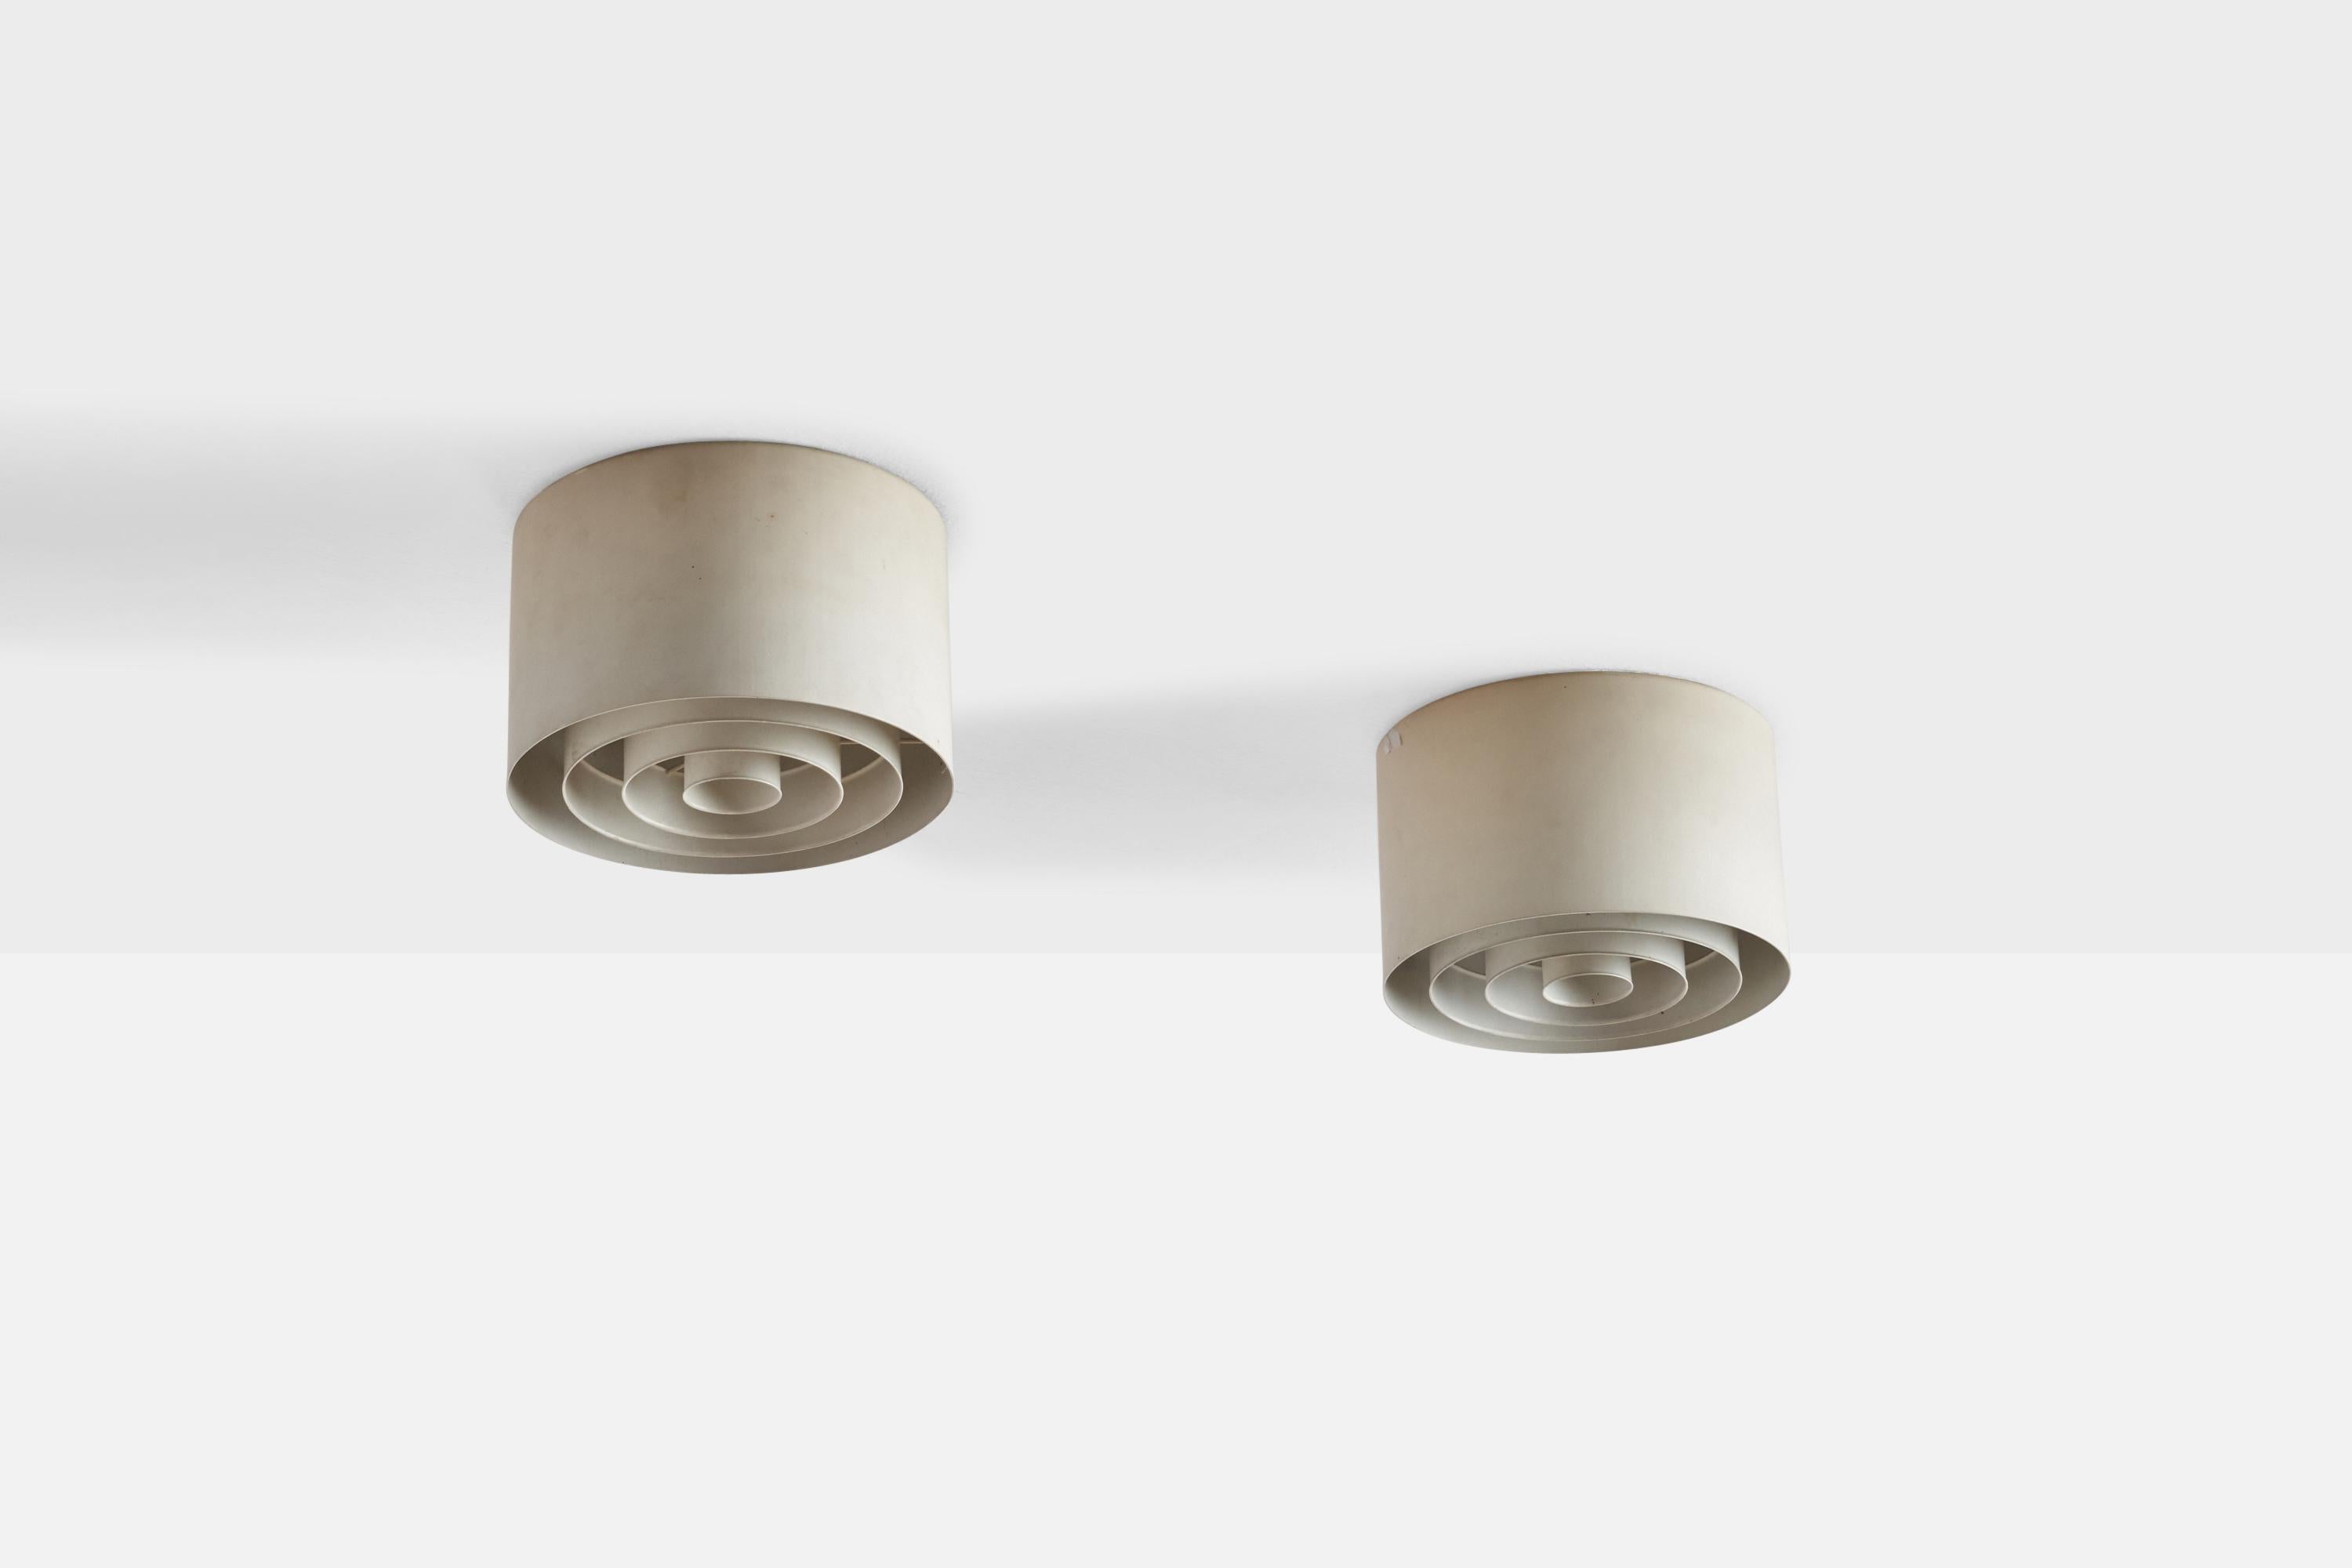 A pair of white-lacquered metal flush mounts designed by Yki Nummi and produced by Ornö, Finland, 1960s.

Dimensions of canopy (inches): N/A
Socket takes standard E-26 bulbs. 2 sockets.There is no maximum wattage stated on the fixture. All lighting